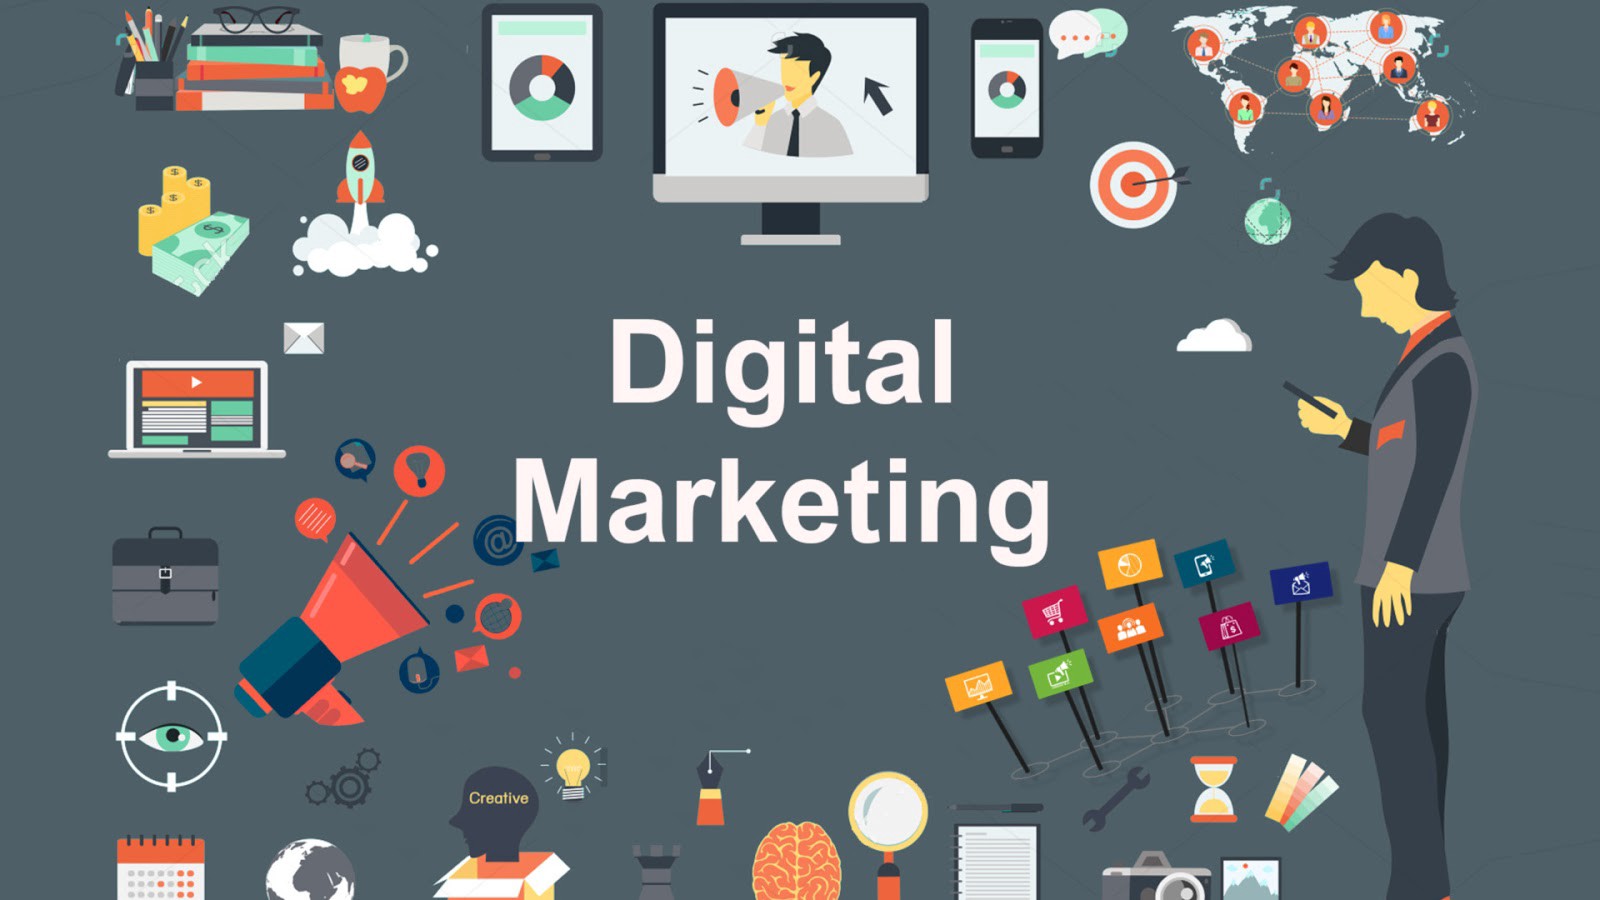 Digital Marketing Trends That You Should Pay Attention To